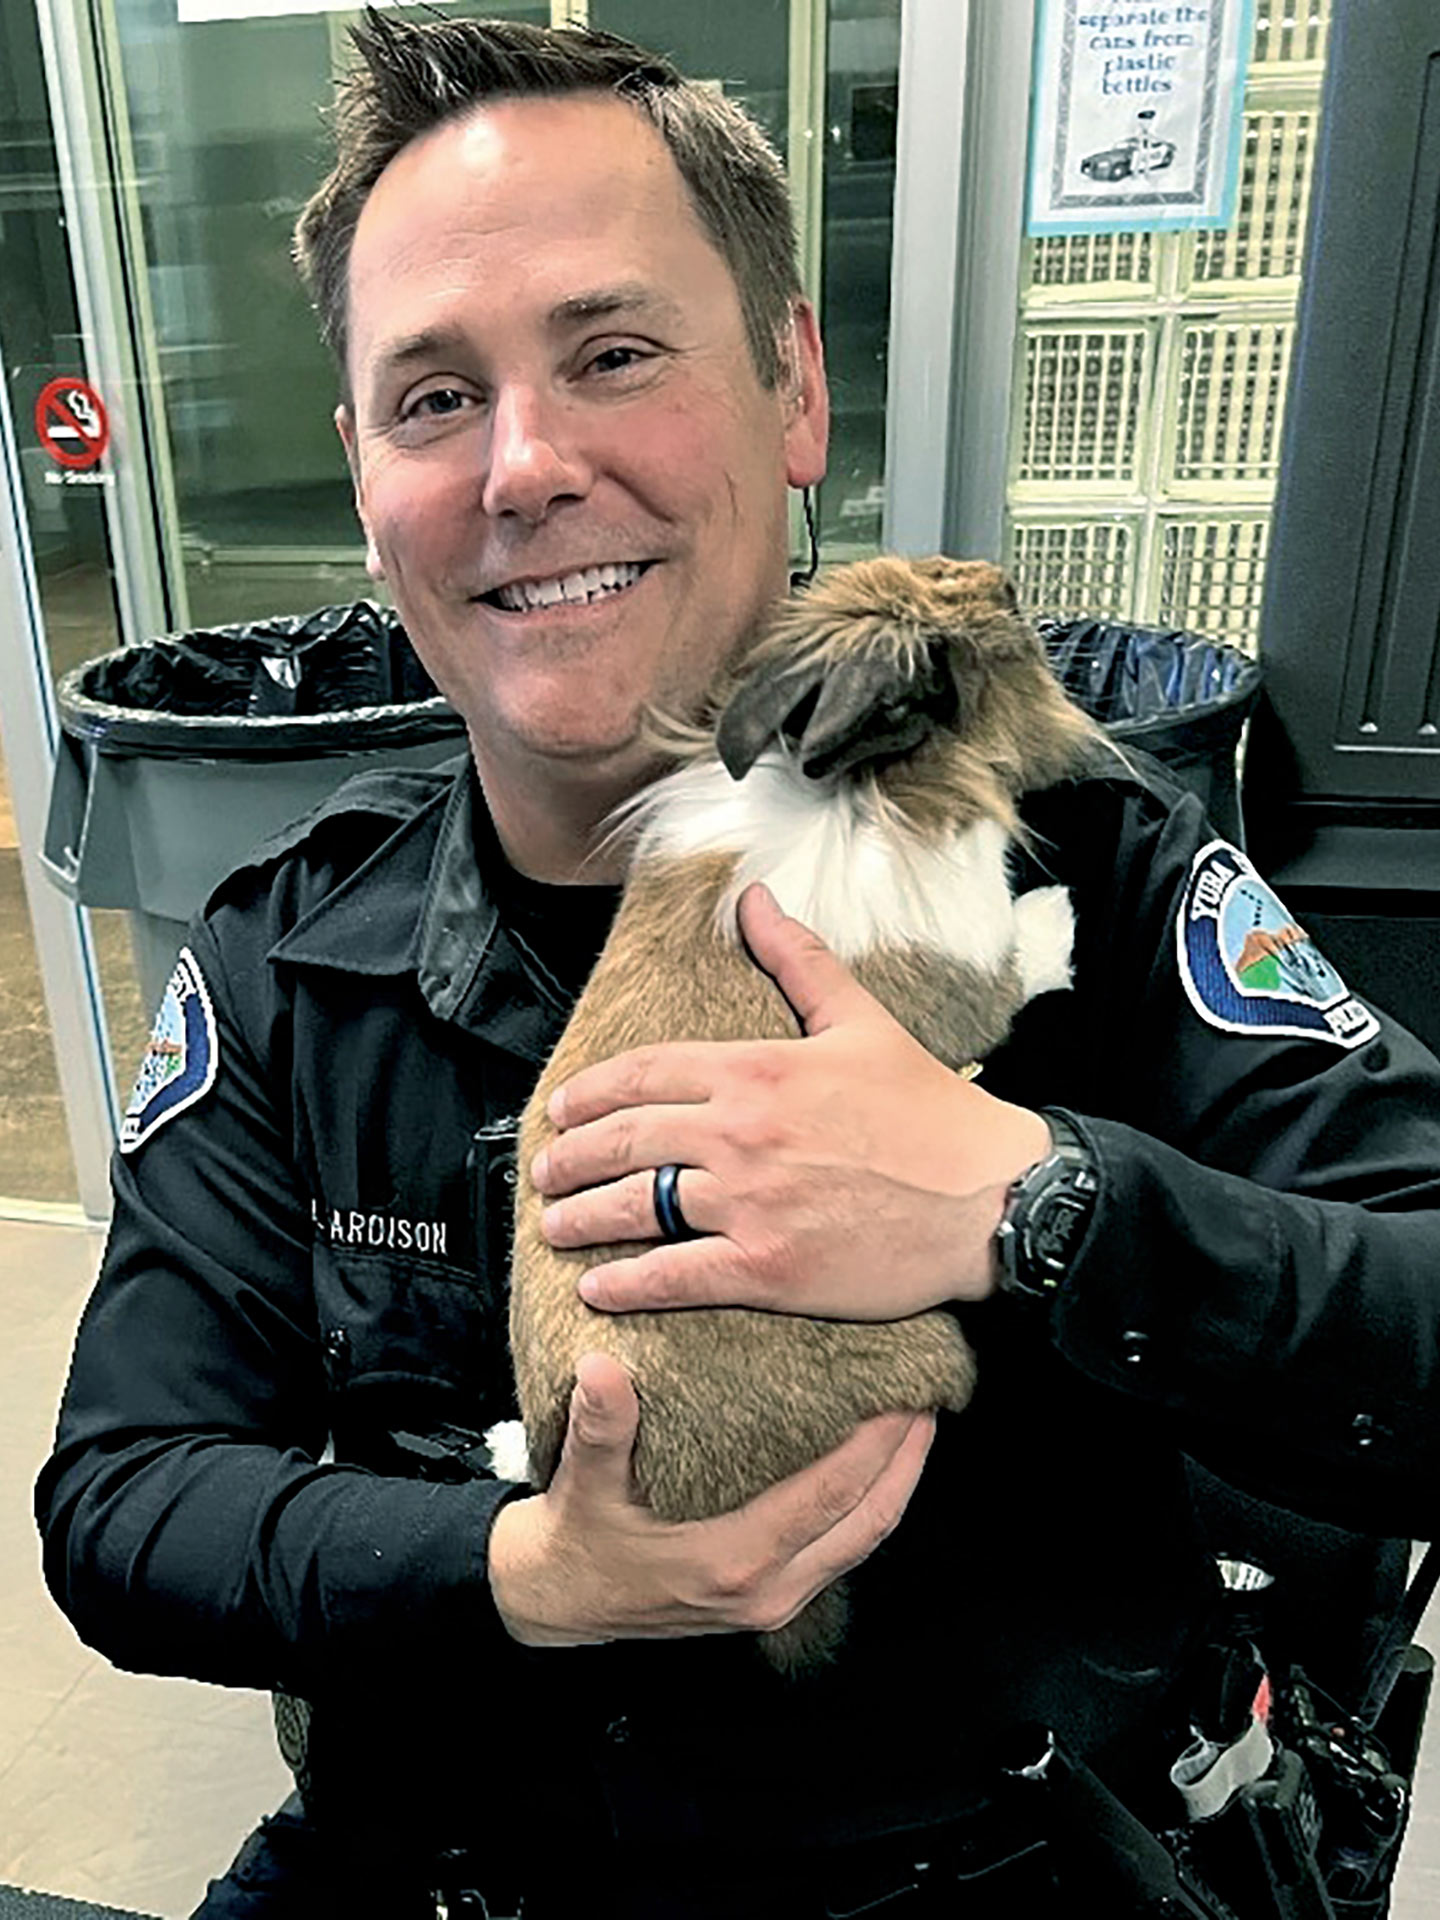 Percy-the-Support-Rabbit-providing-emotional-support-to-Officer-Hardison-yuba-city-police-department-ycpd-alt